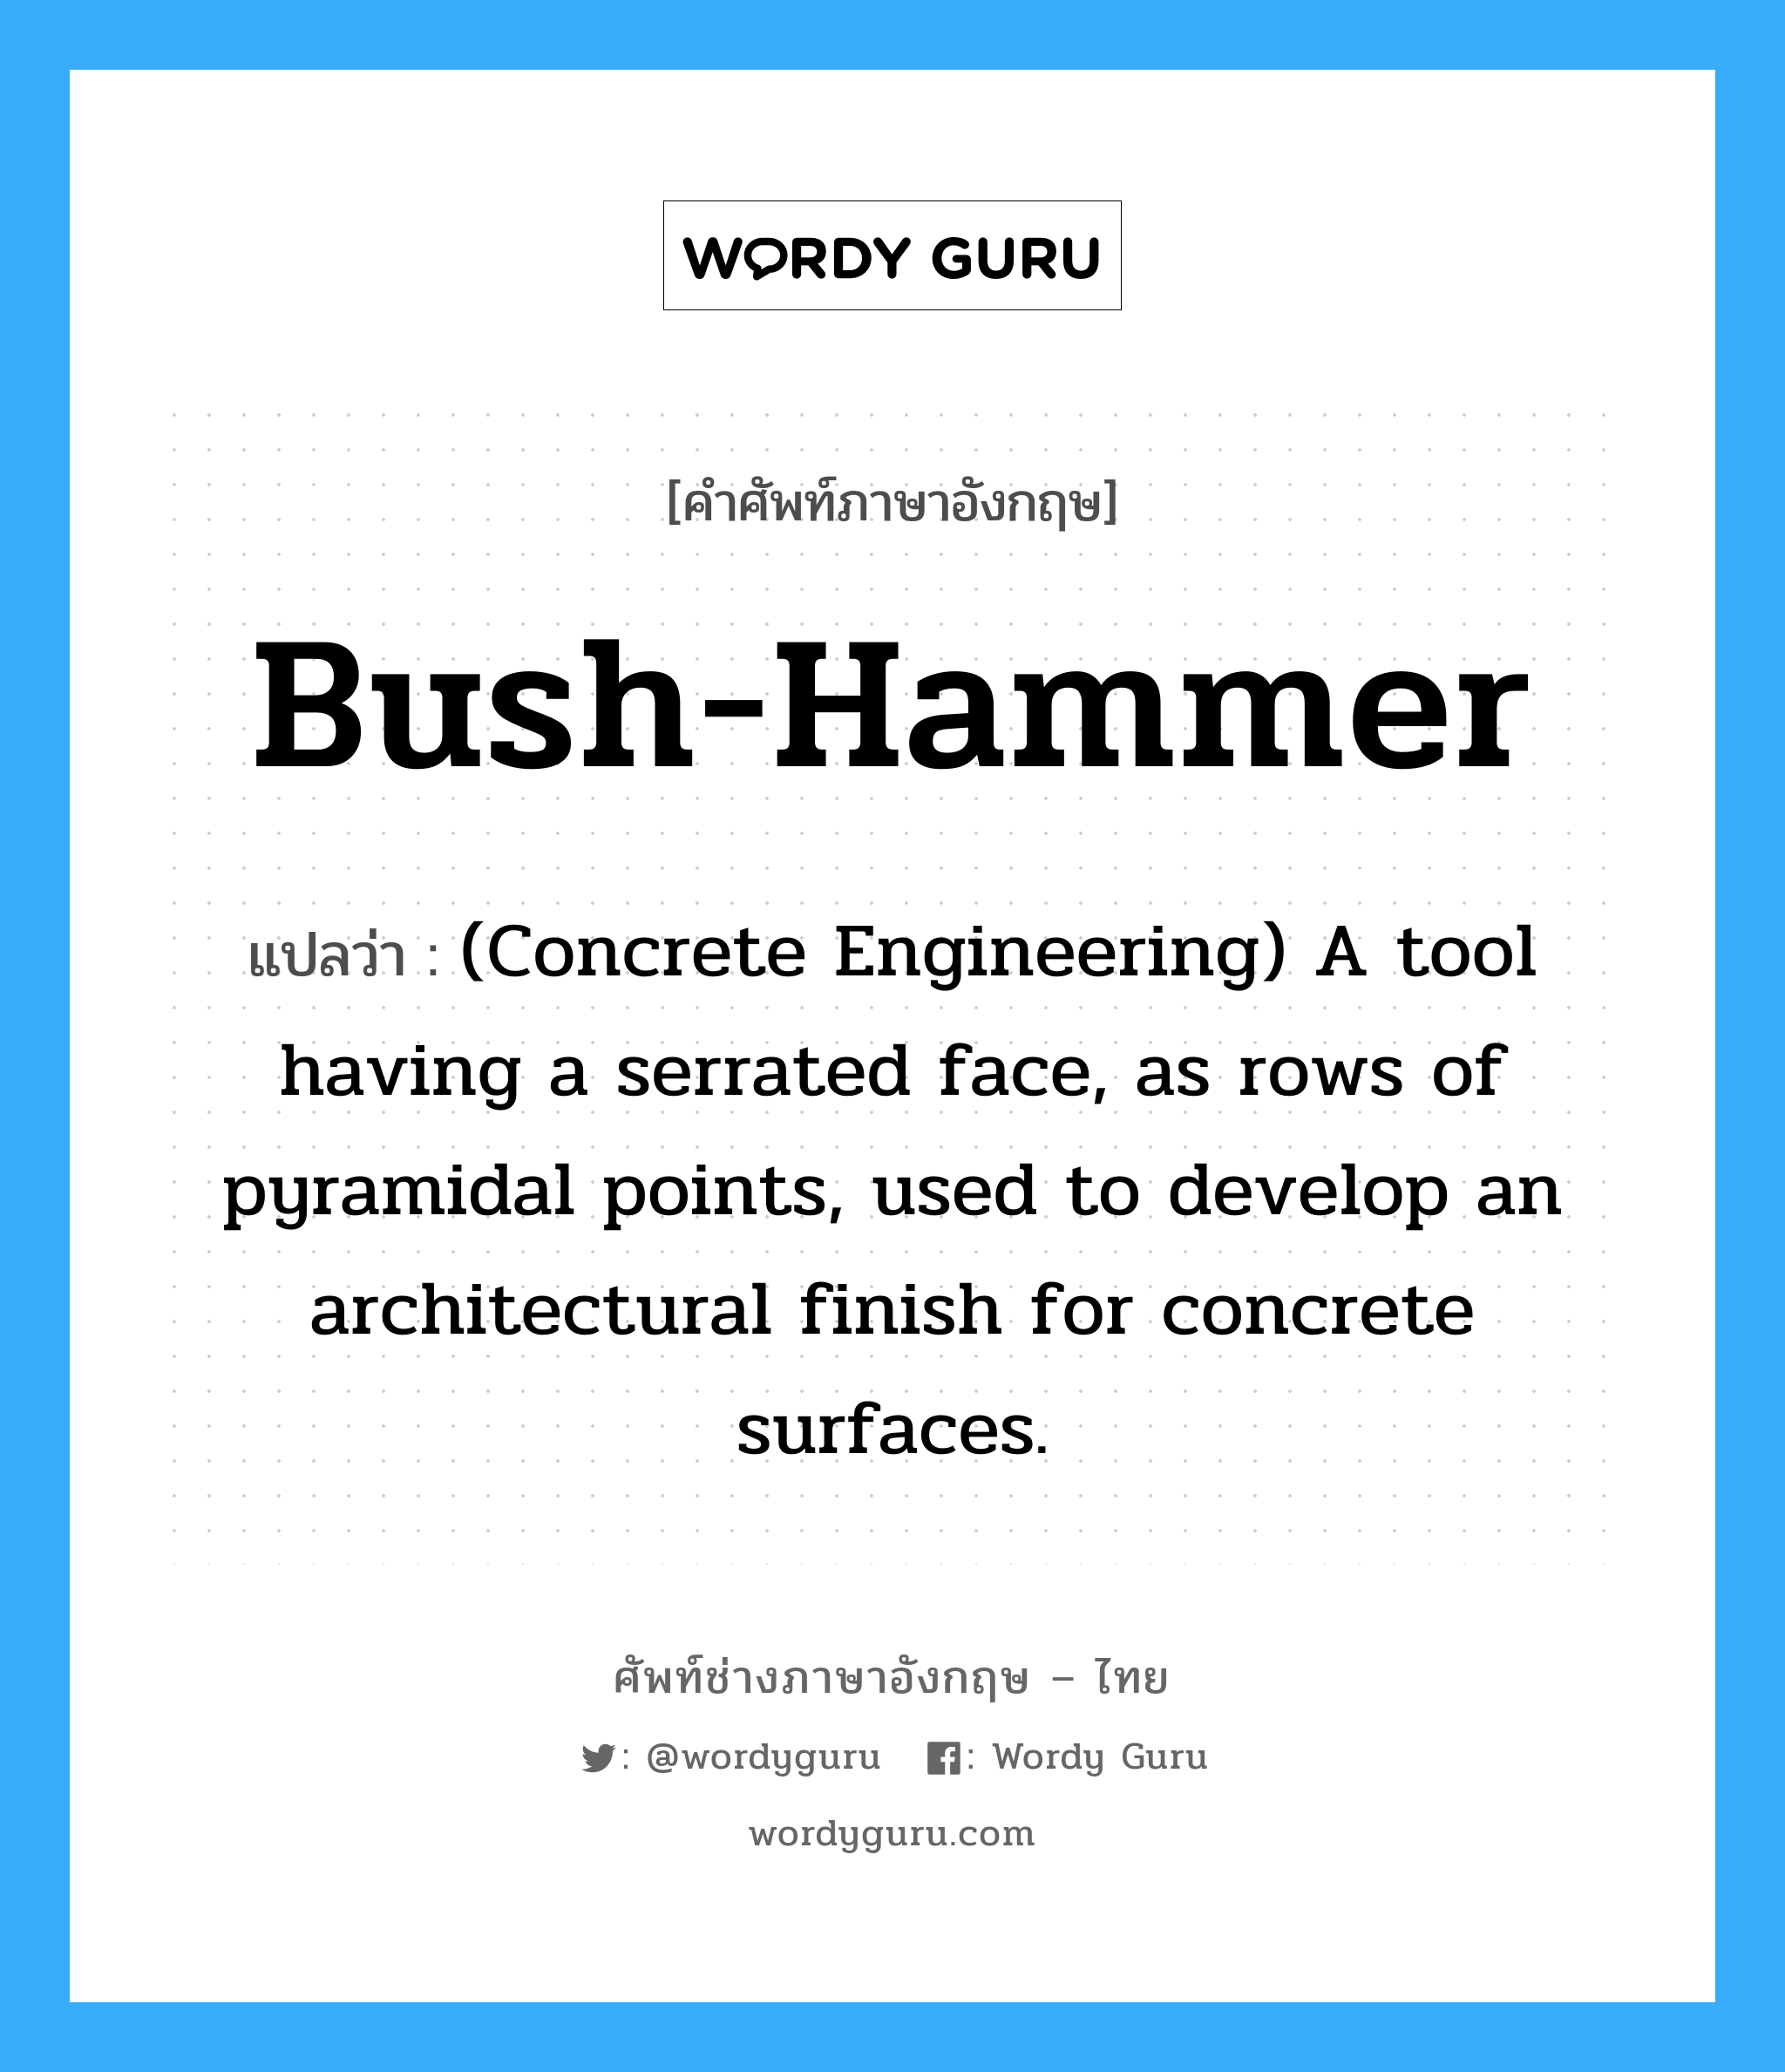 Bush-hammer แปลว่า?, คำศัพท์ช่างภาษาอังกฤษ - ไทย Bush-hammer คำศัพท์ภาษาอังกฤษ Bush-hammer แปลว่า (Concrete Engineering) A tool having a serrated face, as rows of pyramidal points, used to develop an architectural finish for concrete surfaces.